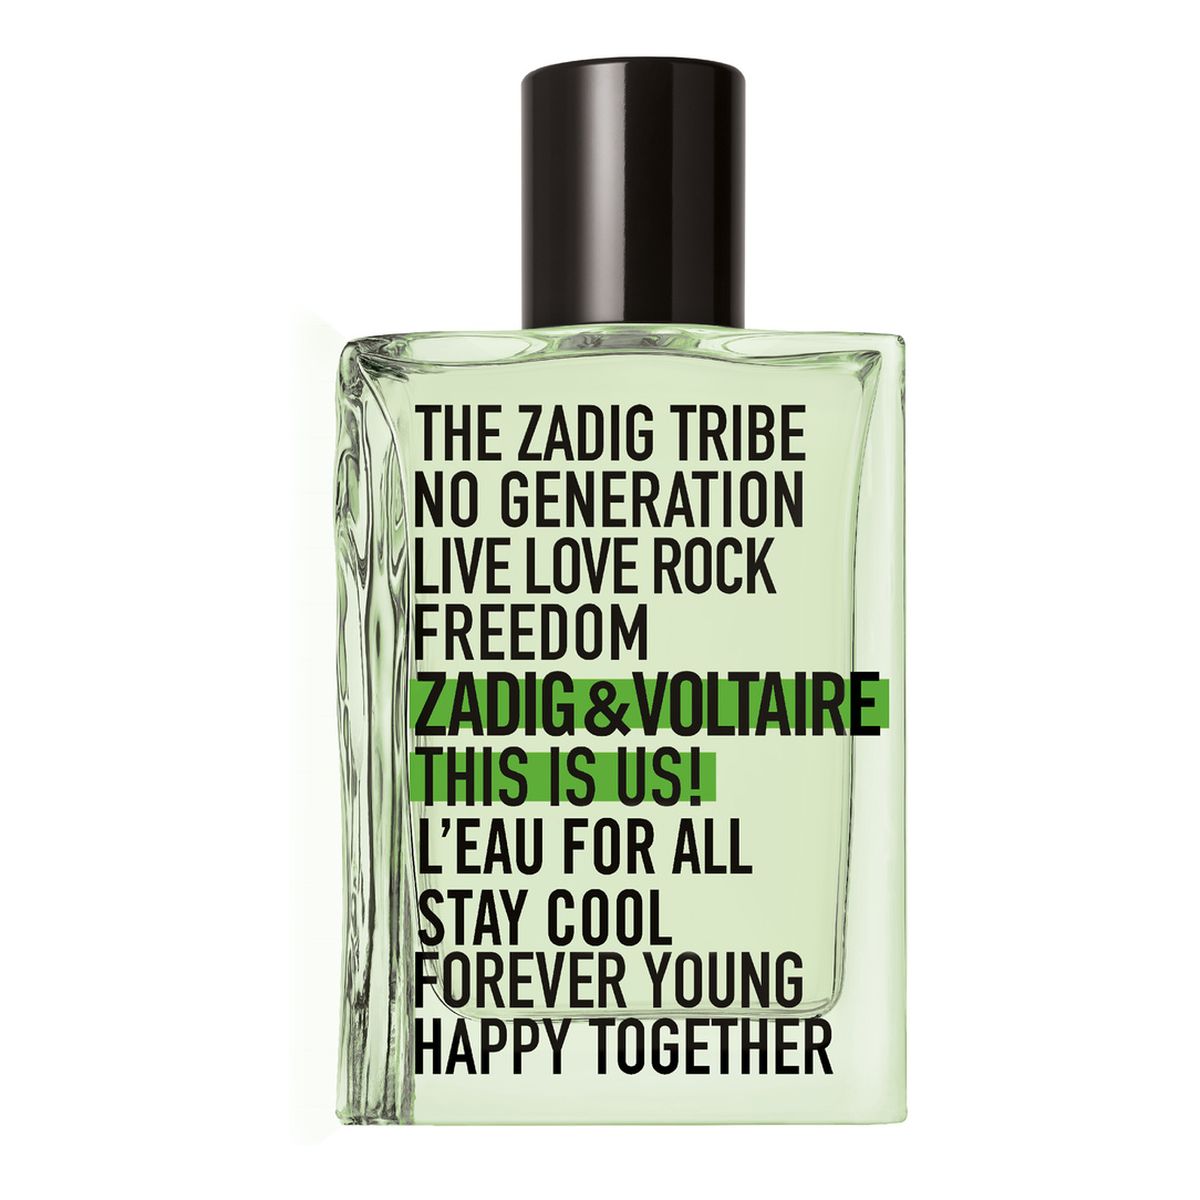 Zadig & Voltaire This is Us! L'Eau for All Woda toaletowa spray 50ml